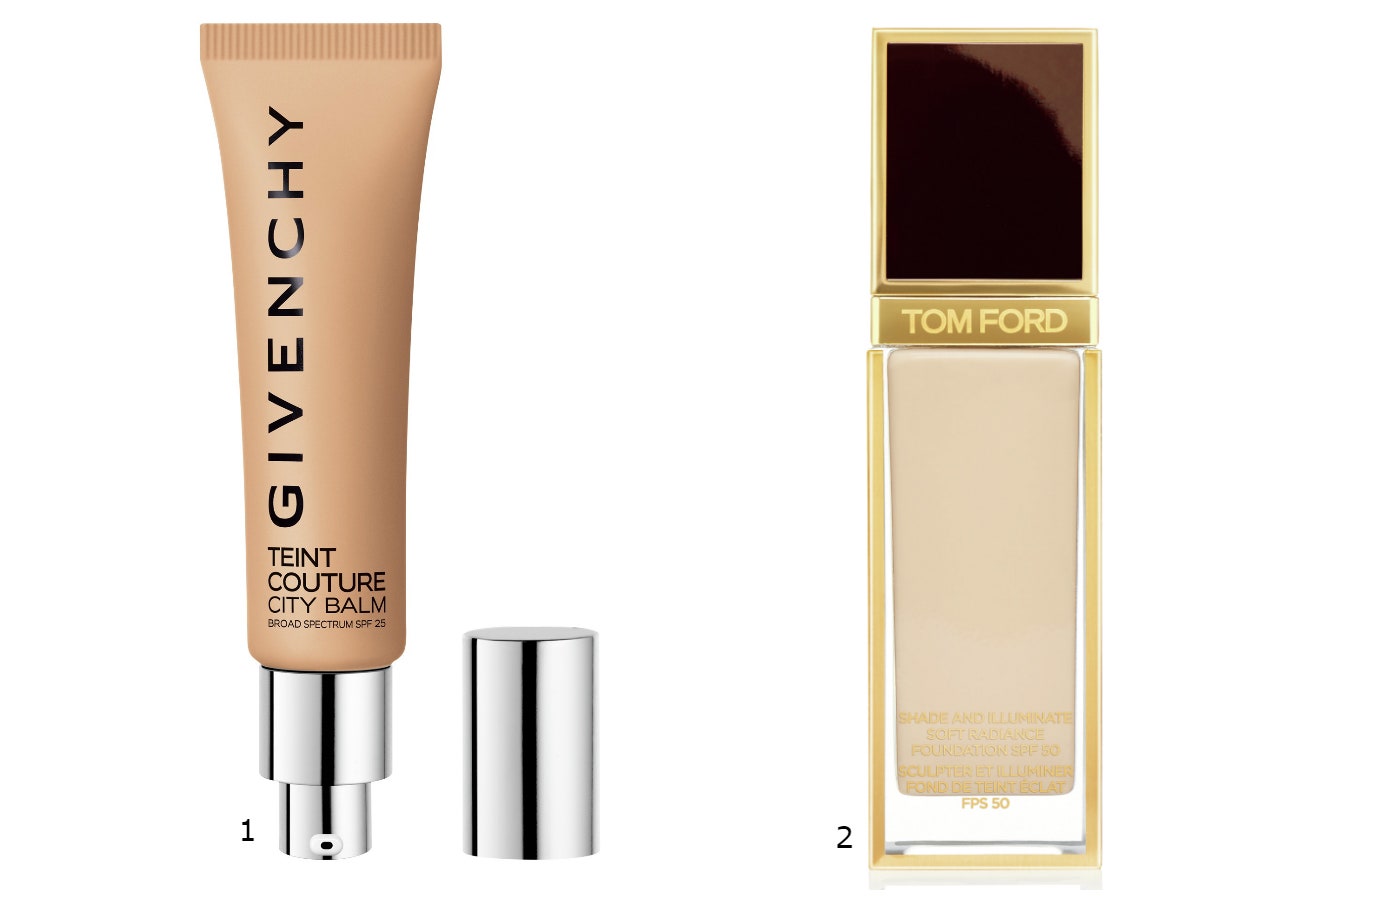 1.Givenchy Teint Couture City Balm SPF 25 2.Tom Ford Shade And Illuminate Soft Radiance Foundation SPF 50